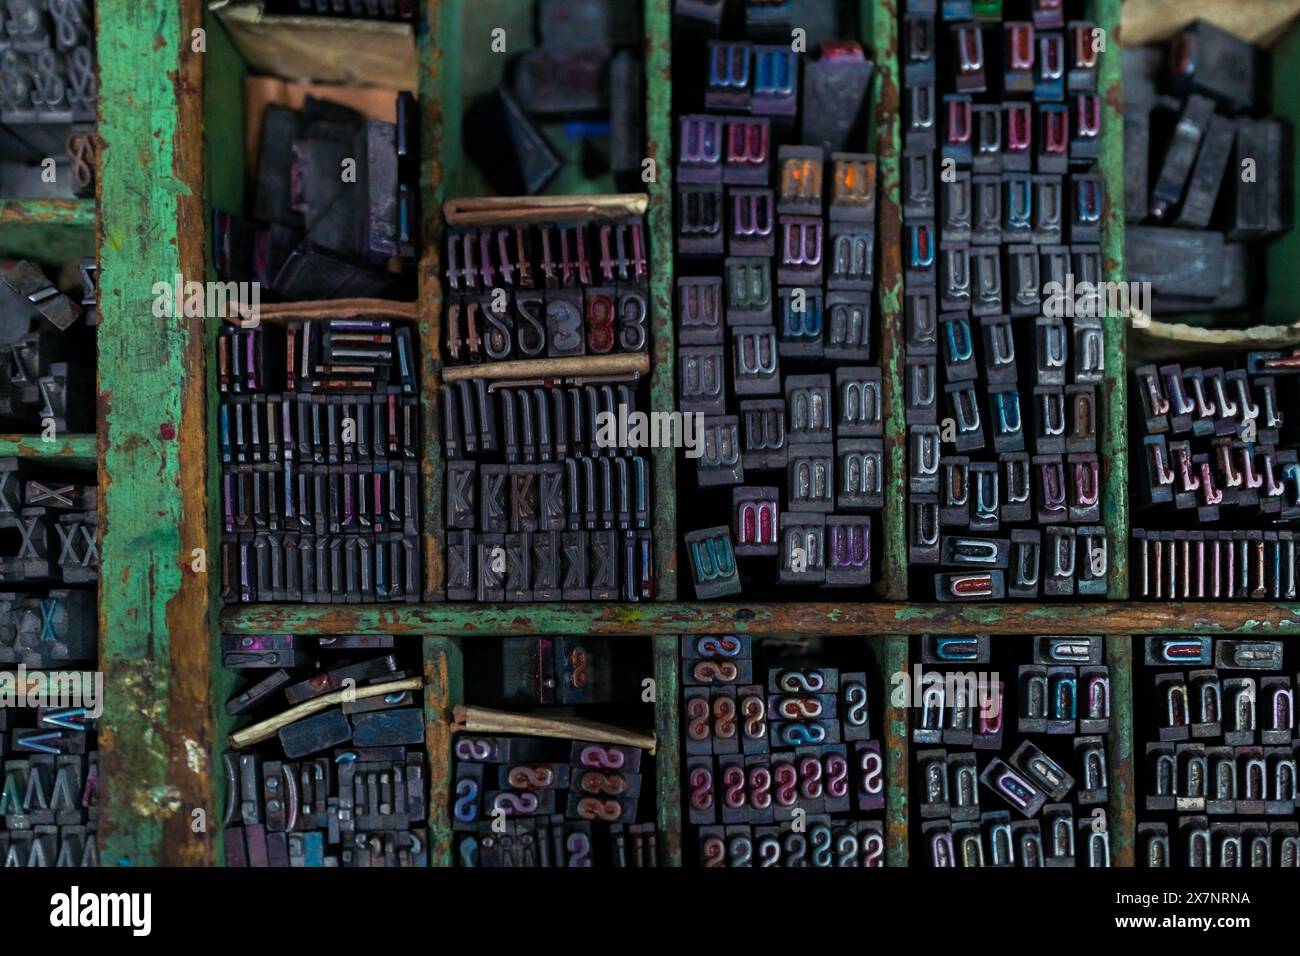 The movable metal letterpress types are seen stored in a type case at an antique print shop in Cali, Colombia. Stock Photo